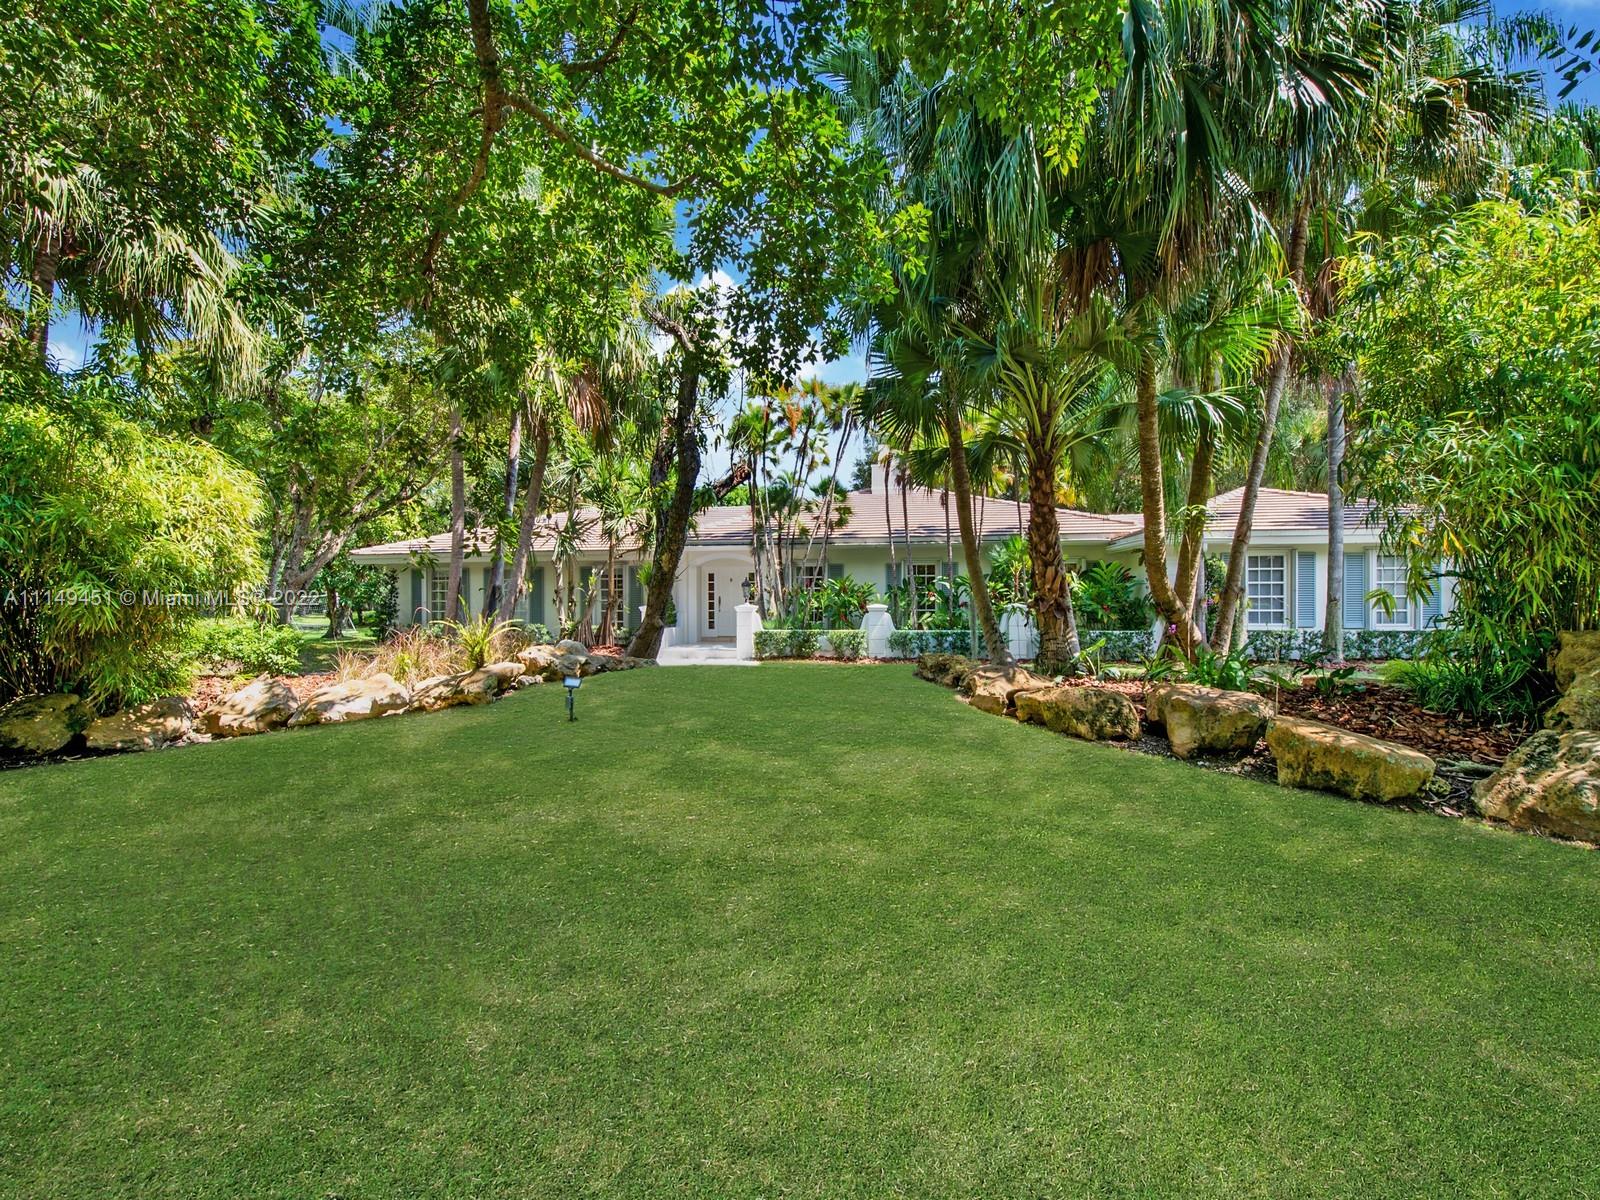 This beautiful single-story renovated home on historic Old Cutler Road in South Gables is within minutes to top-rated schools, Matheson Hammock Park & Marina, and Fairchild Tropical Botanic Garden. It has eye-catching curb appeal with lush tropical landscaping including multiple fruit trees and mature oaks, and is ideally situated on a large corner lot on a cul-de-sac side street. In addition to its sought-after location, this lovely home has 5 bedrooms with 4 bathrooms including a cabana bath, grand foyer entrance, double-sided fireplace shared by the formal living and family room, formal dining room with architectural details, family room with built-ins and wet bar with seating, spacious kitchen with ample storage and counter space, island seating, and breakfast area.